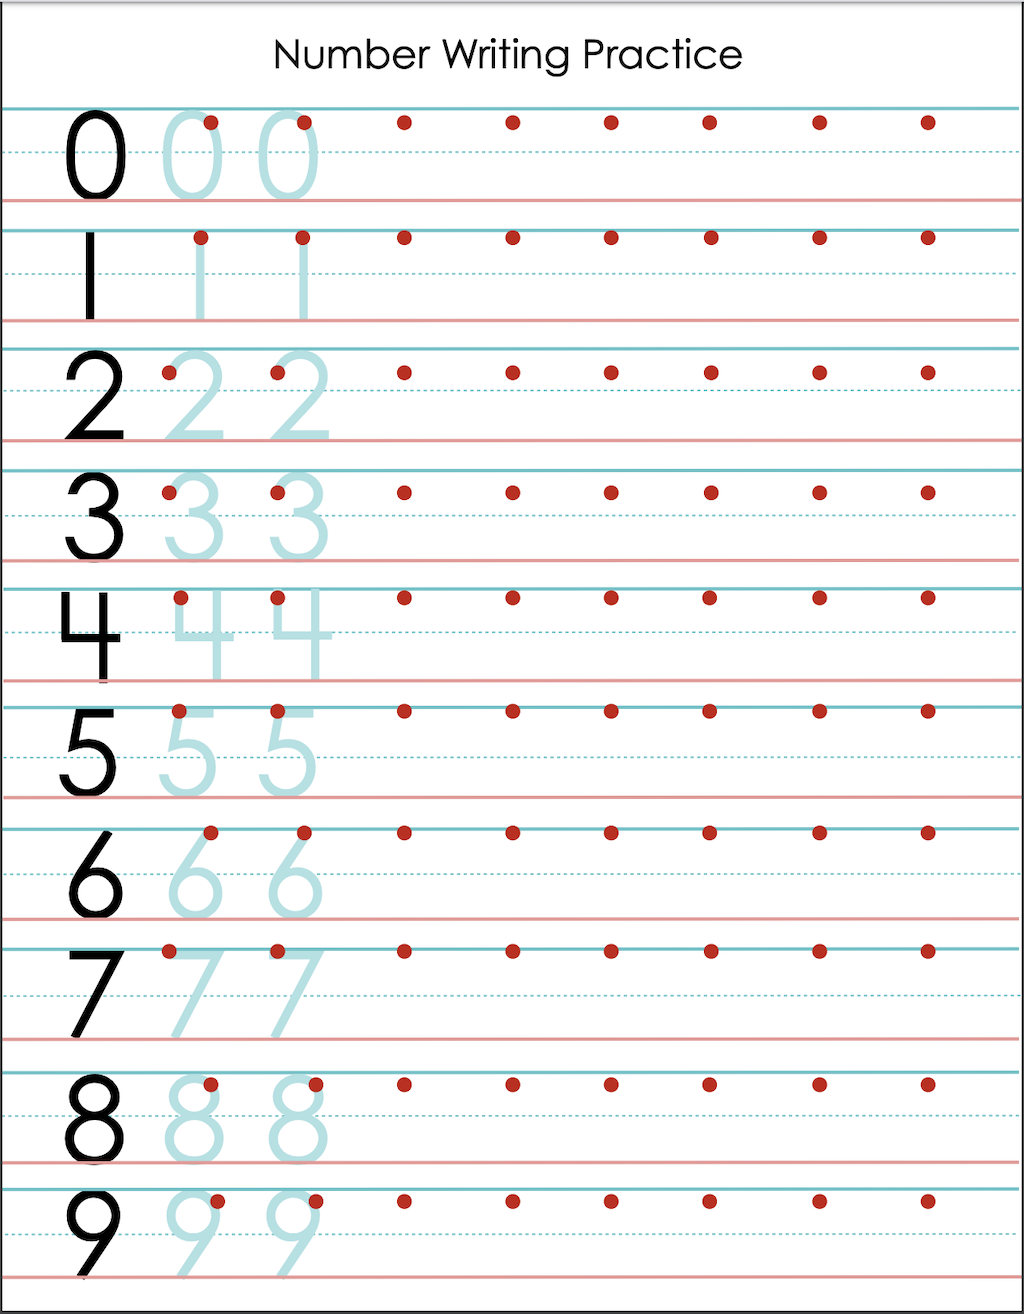 Number Writing Practice Sheet Free Printable Flanders Family Homelife